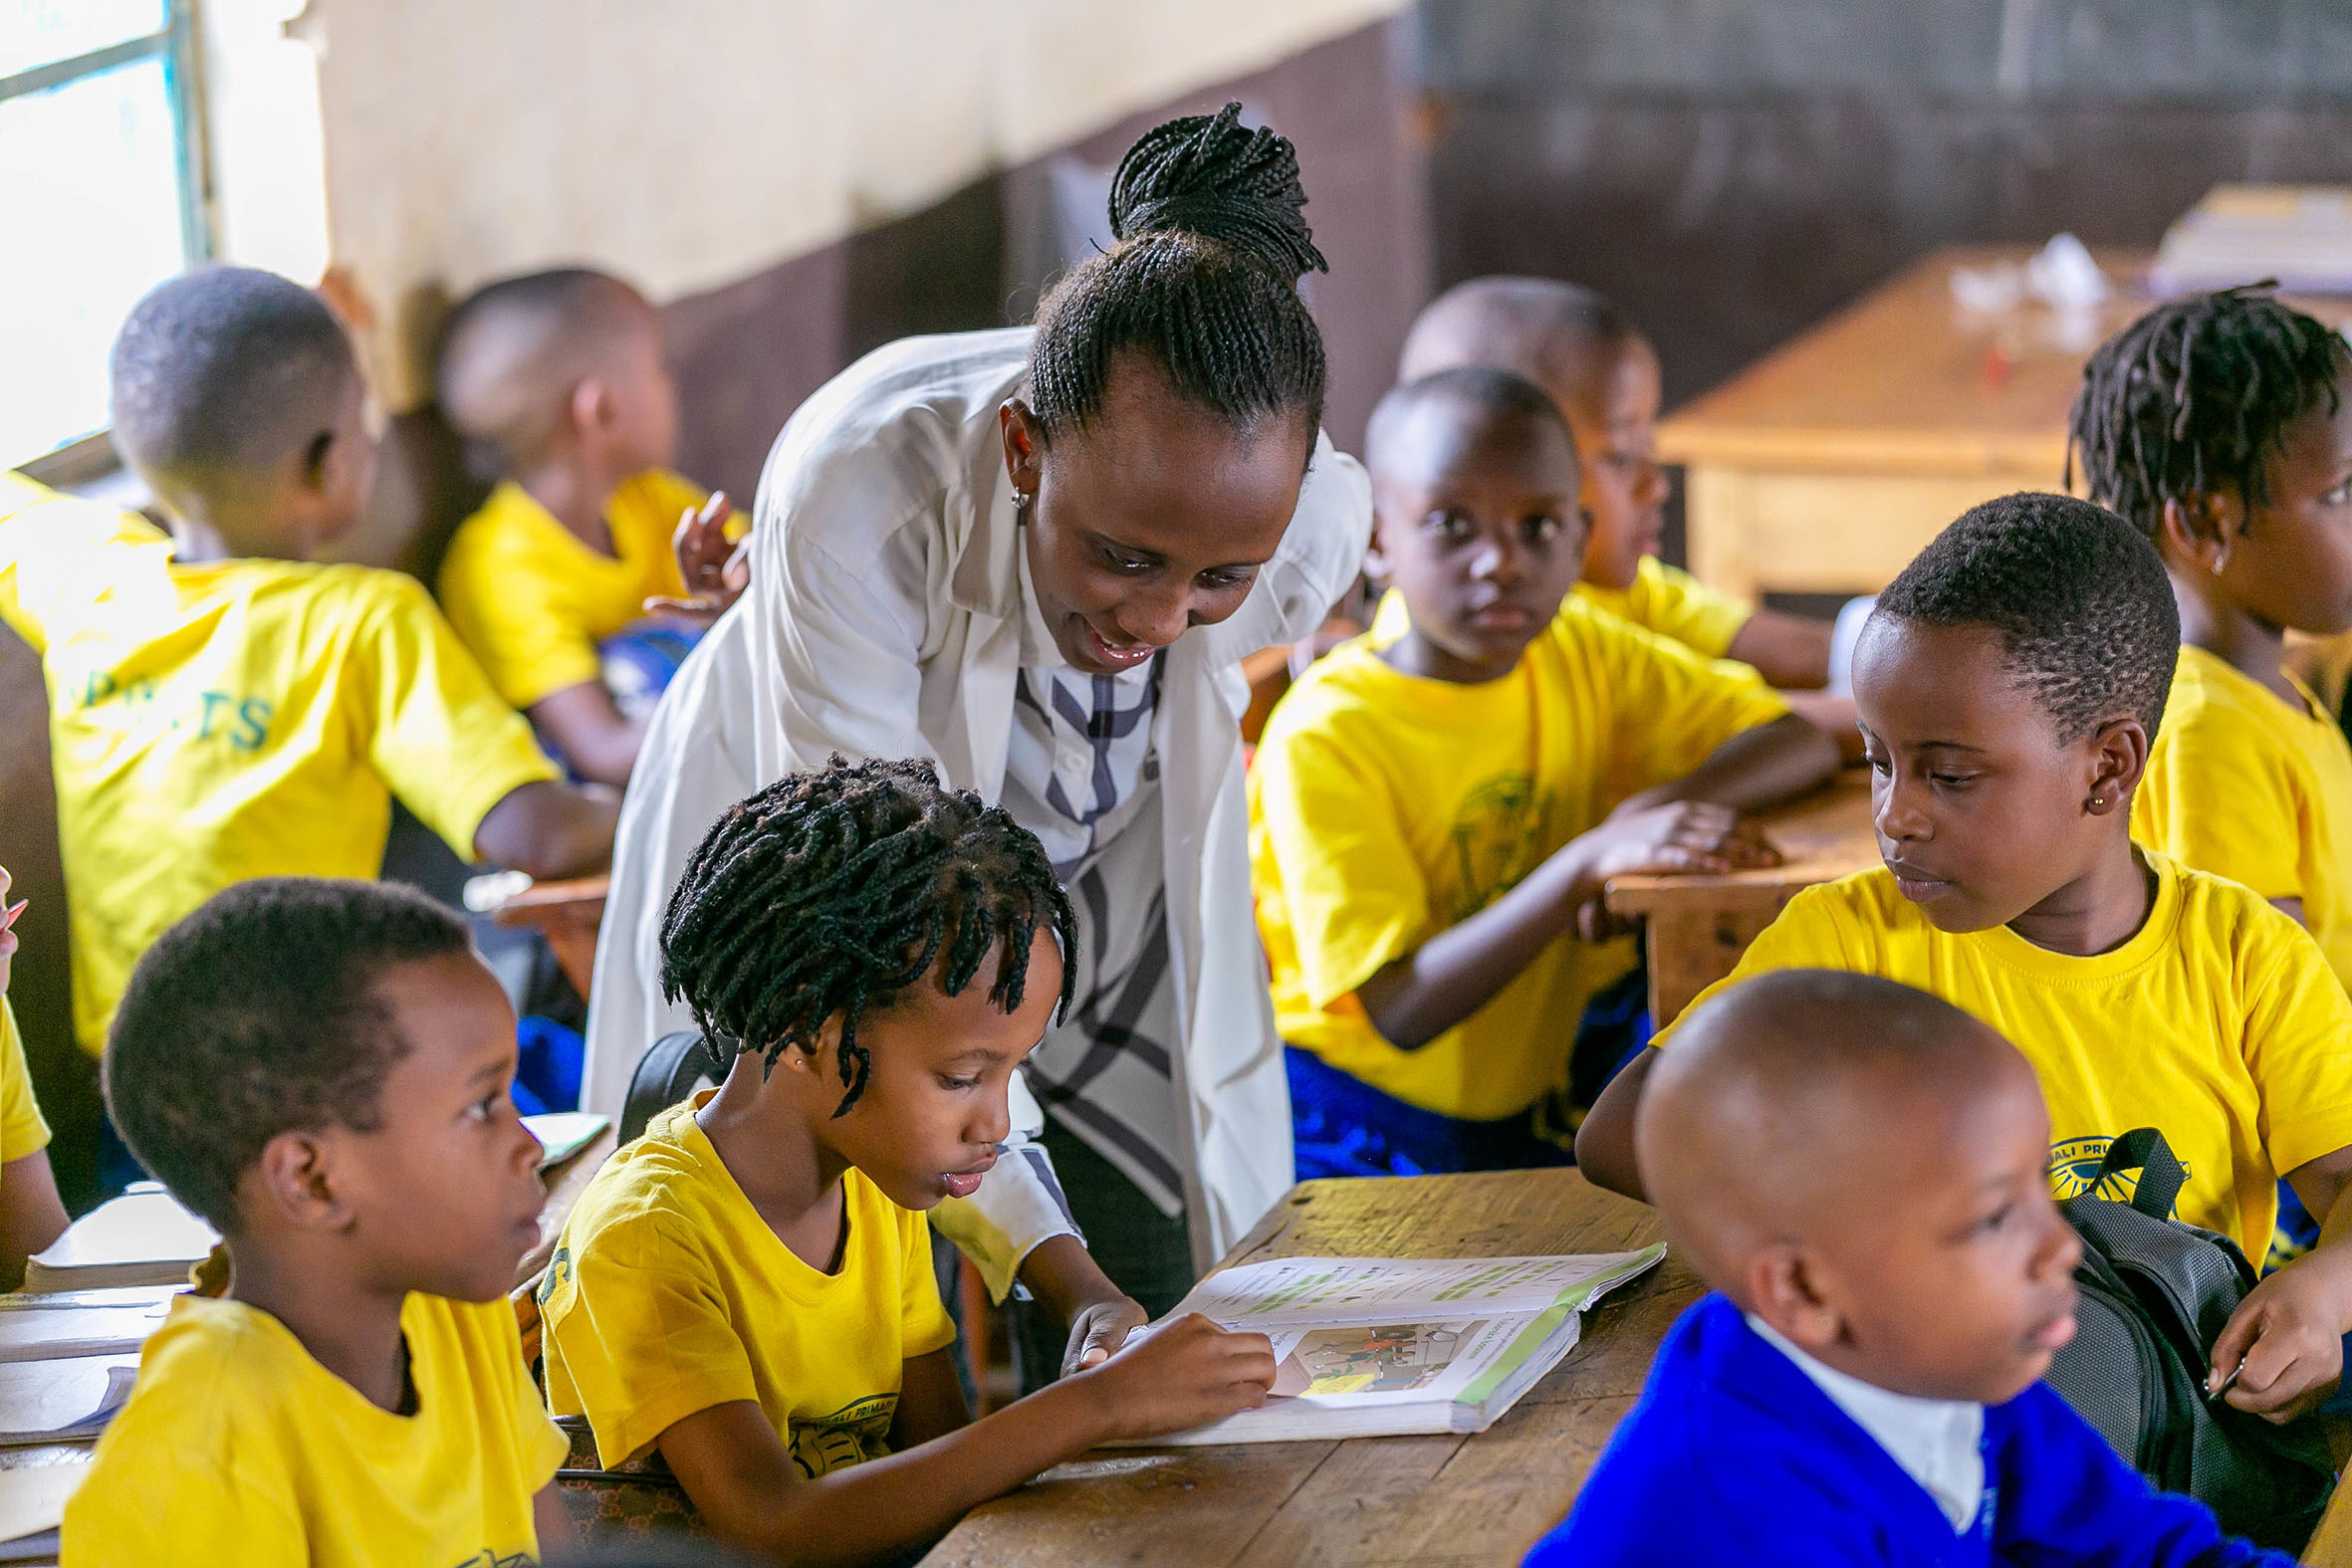 A primary school teacher helps pupils during a class at Groupe Scolaire Camp Kigali in 2019. While presenting the Government activities in basic education under the National Strategy for Transformation  to both Chambers of Parliament, Prime Minister Edouard Ngirente announced  the decision to raise teachersu2019 pay after considering teachersu2019 financial means, welfare and the link between that and the quality of education. File